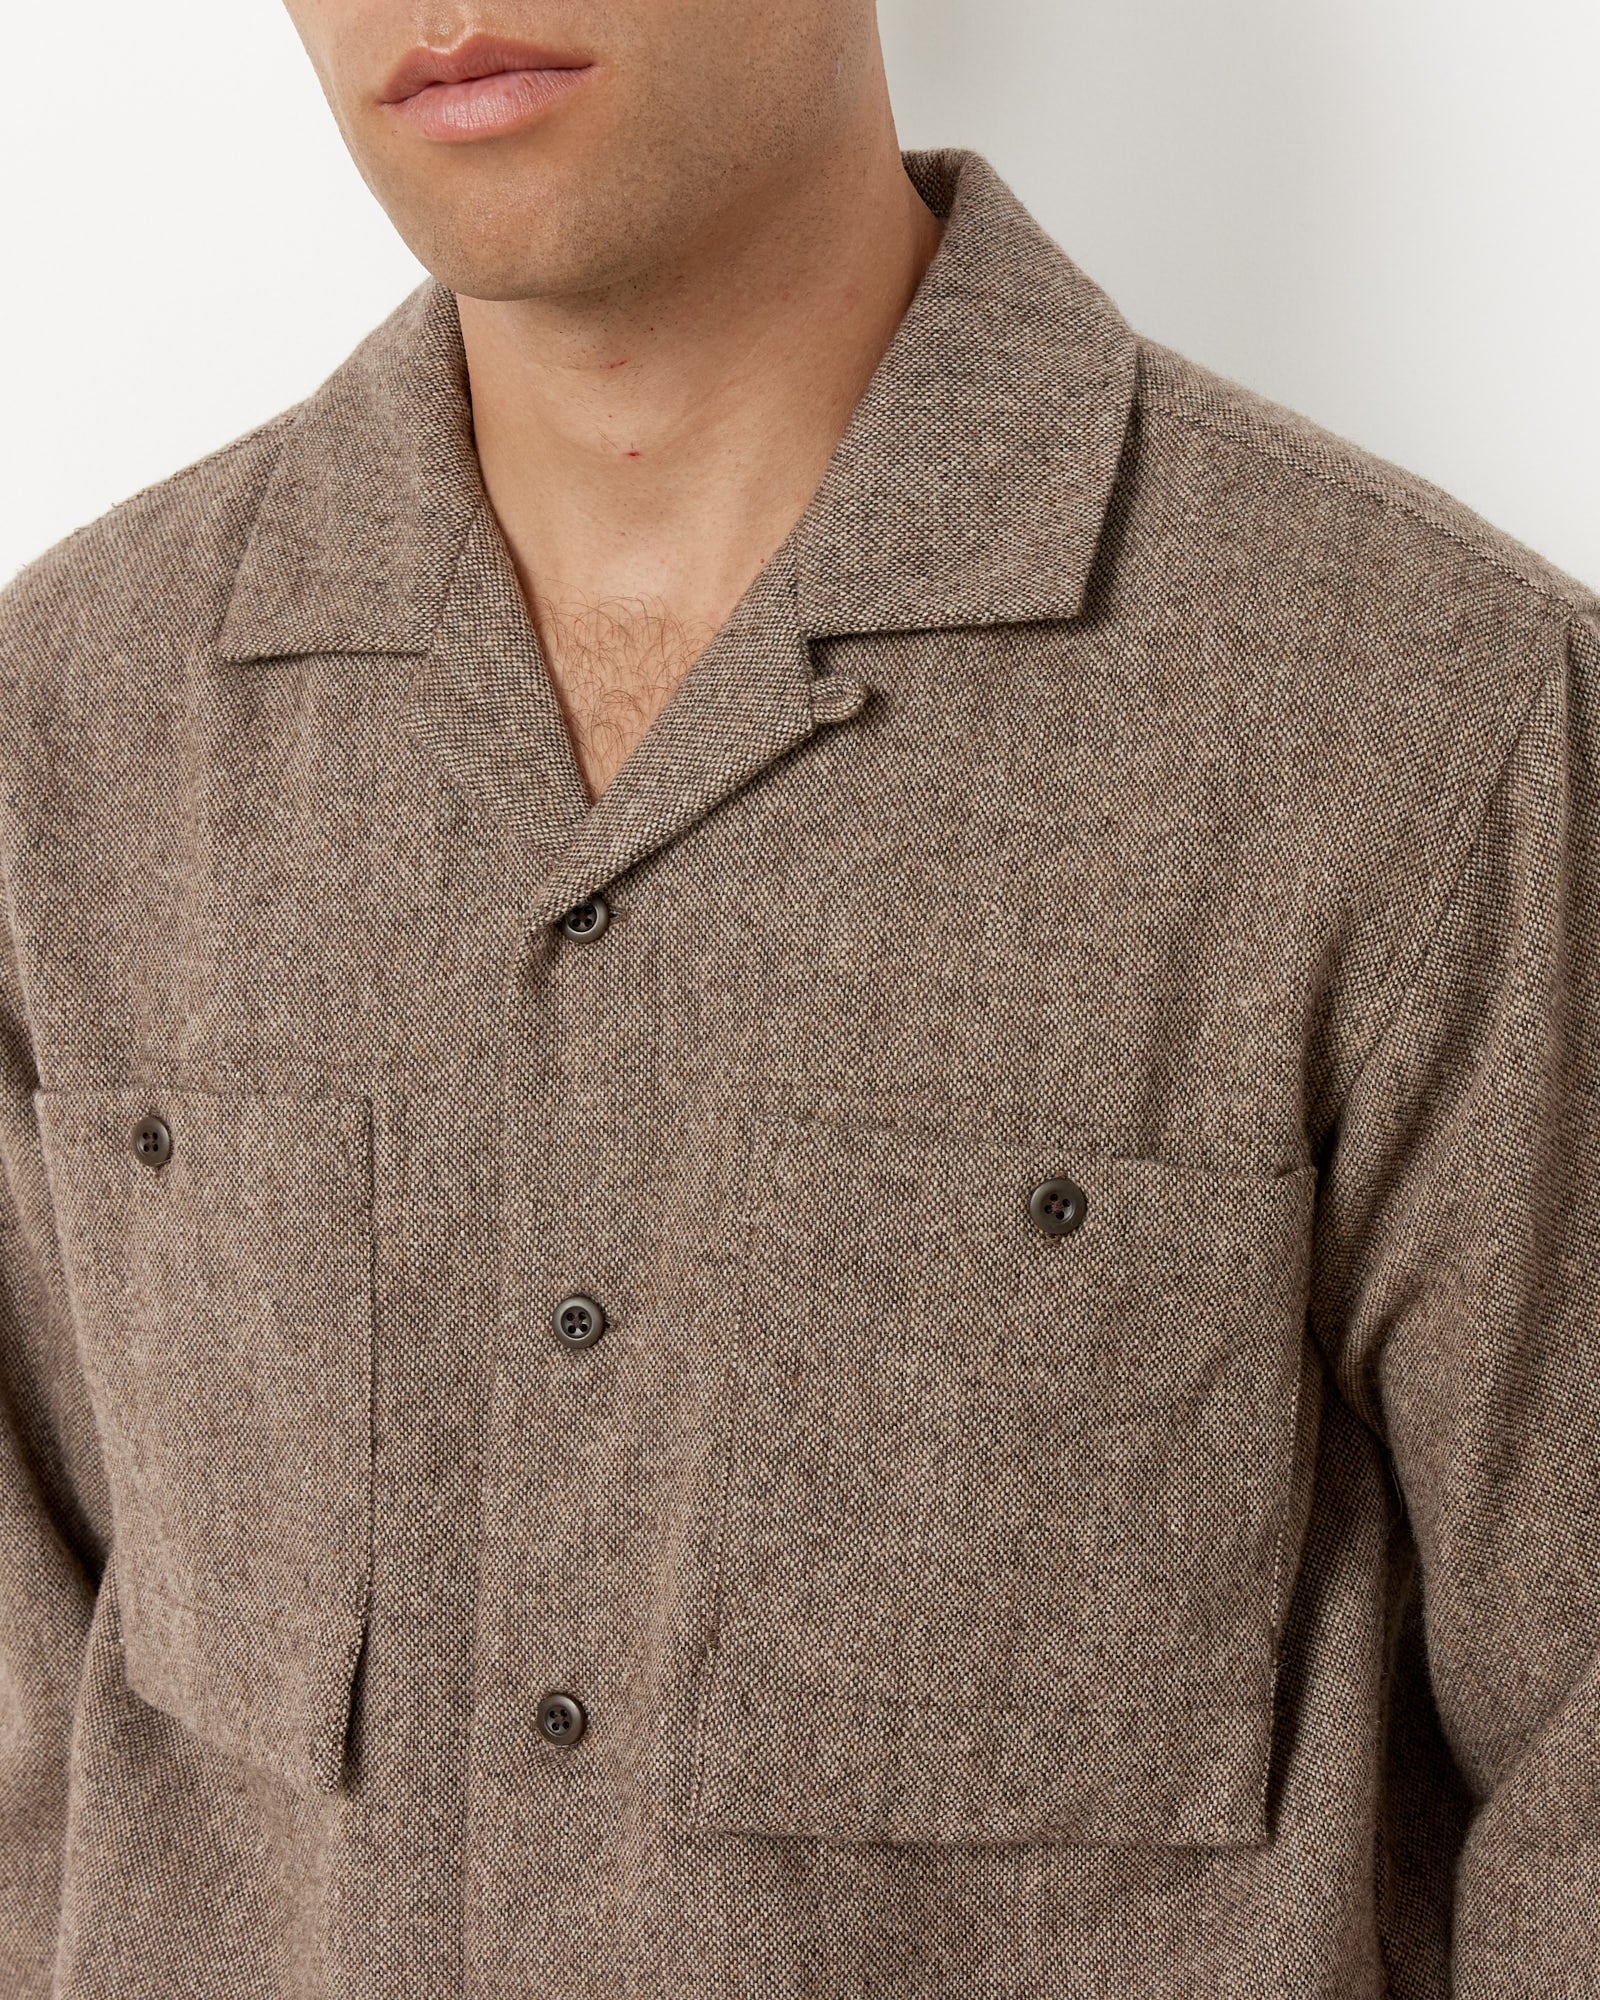 Recycled Wool Field Shirt in Brown in Charcoal